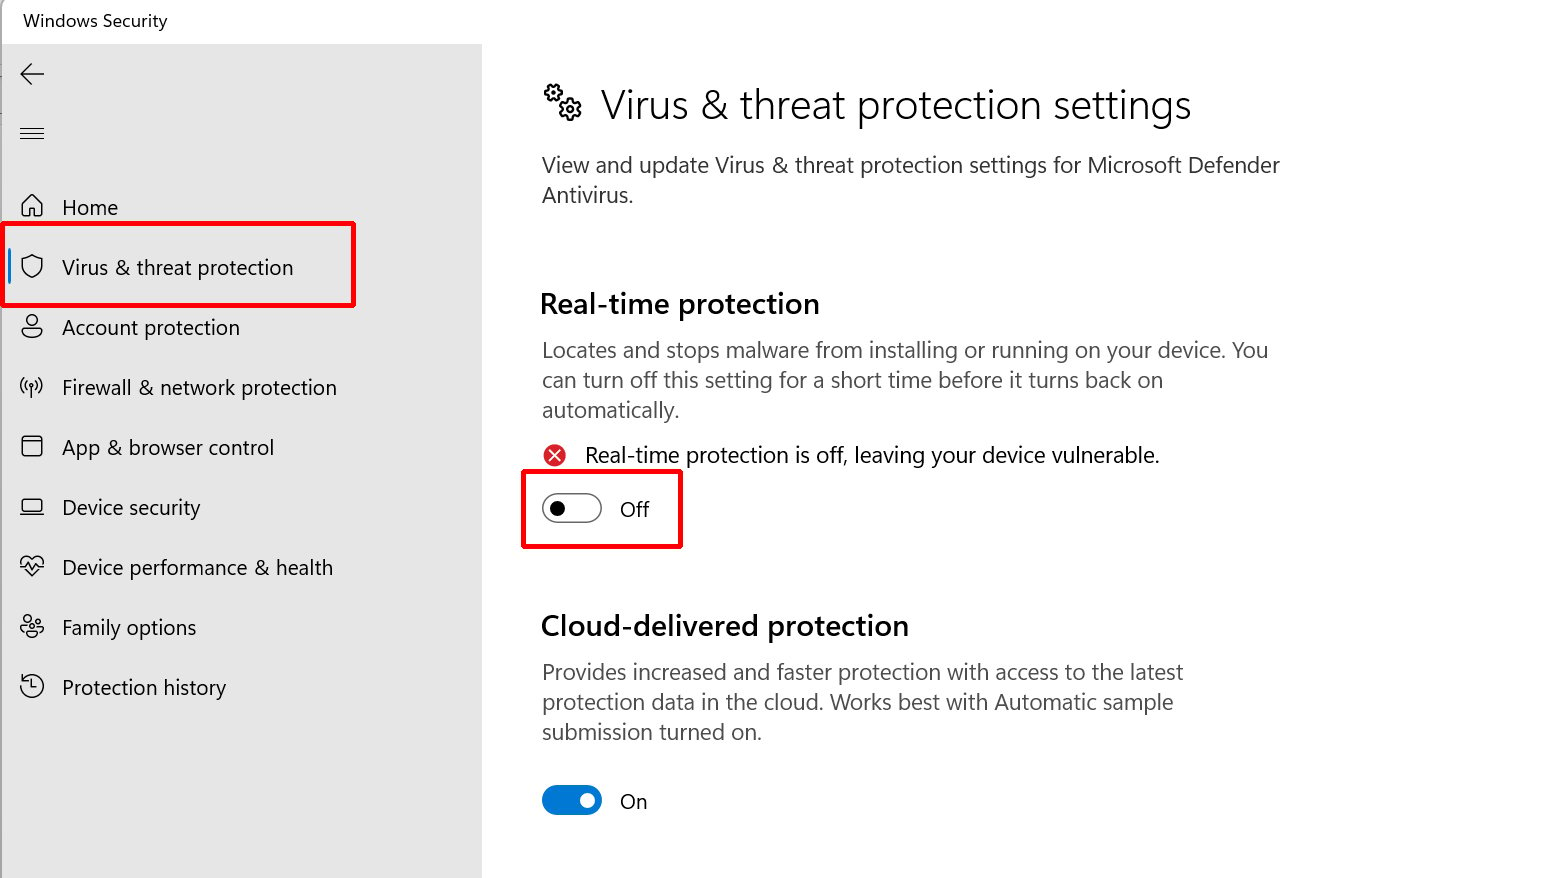 Windows settings where Antivirus is highlighted and shows that it is off.